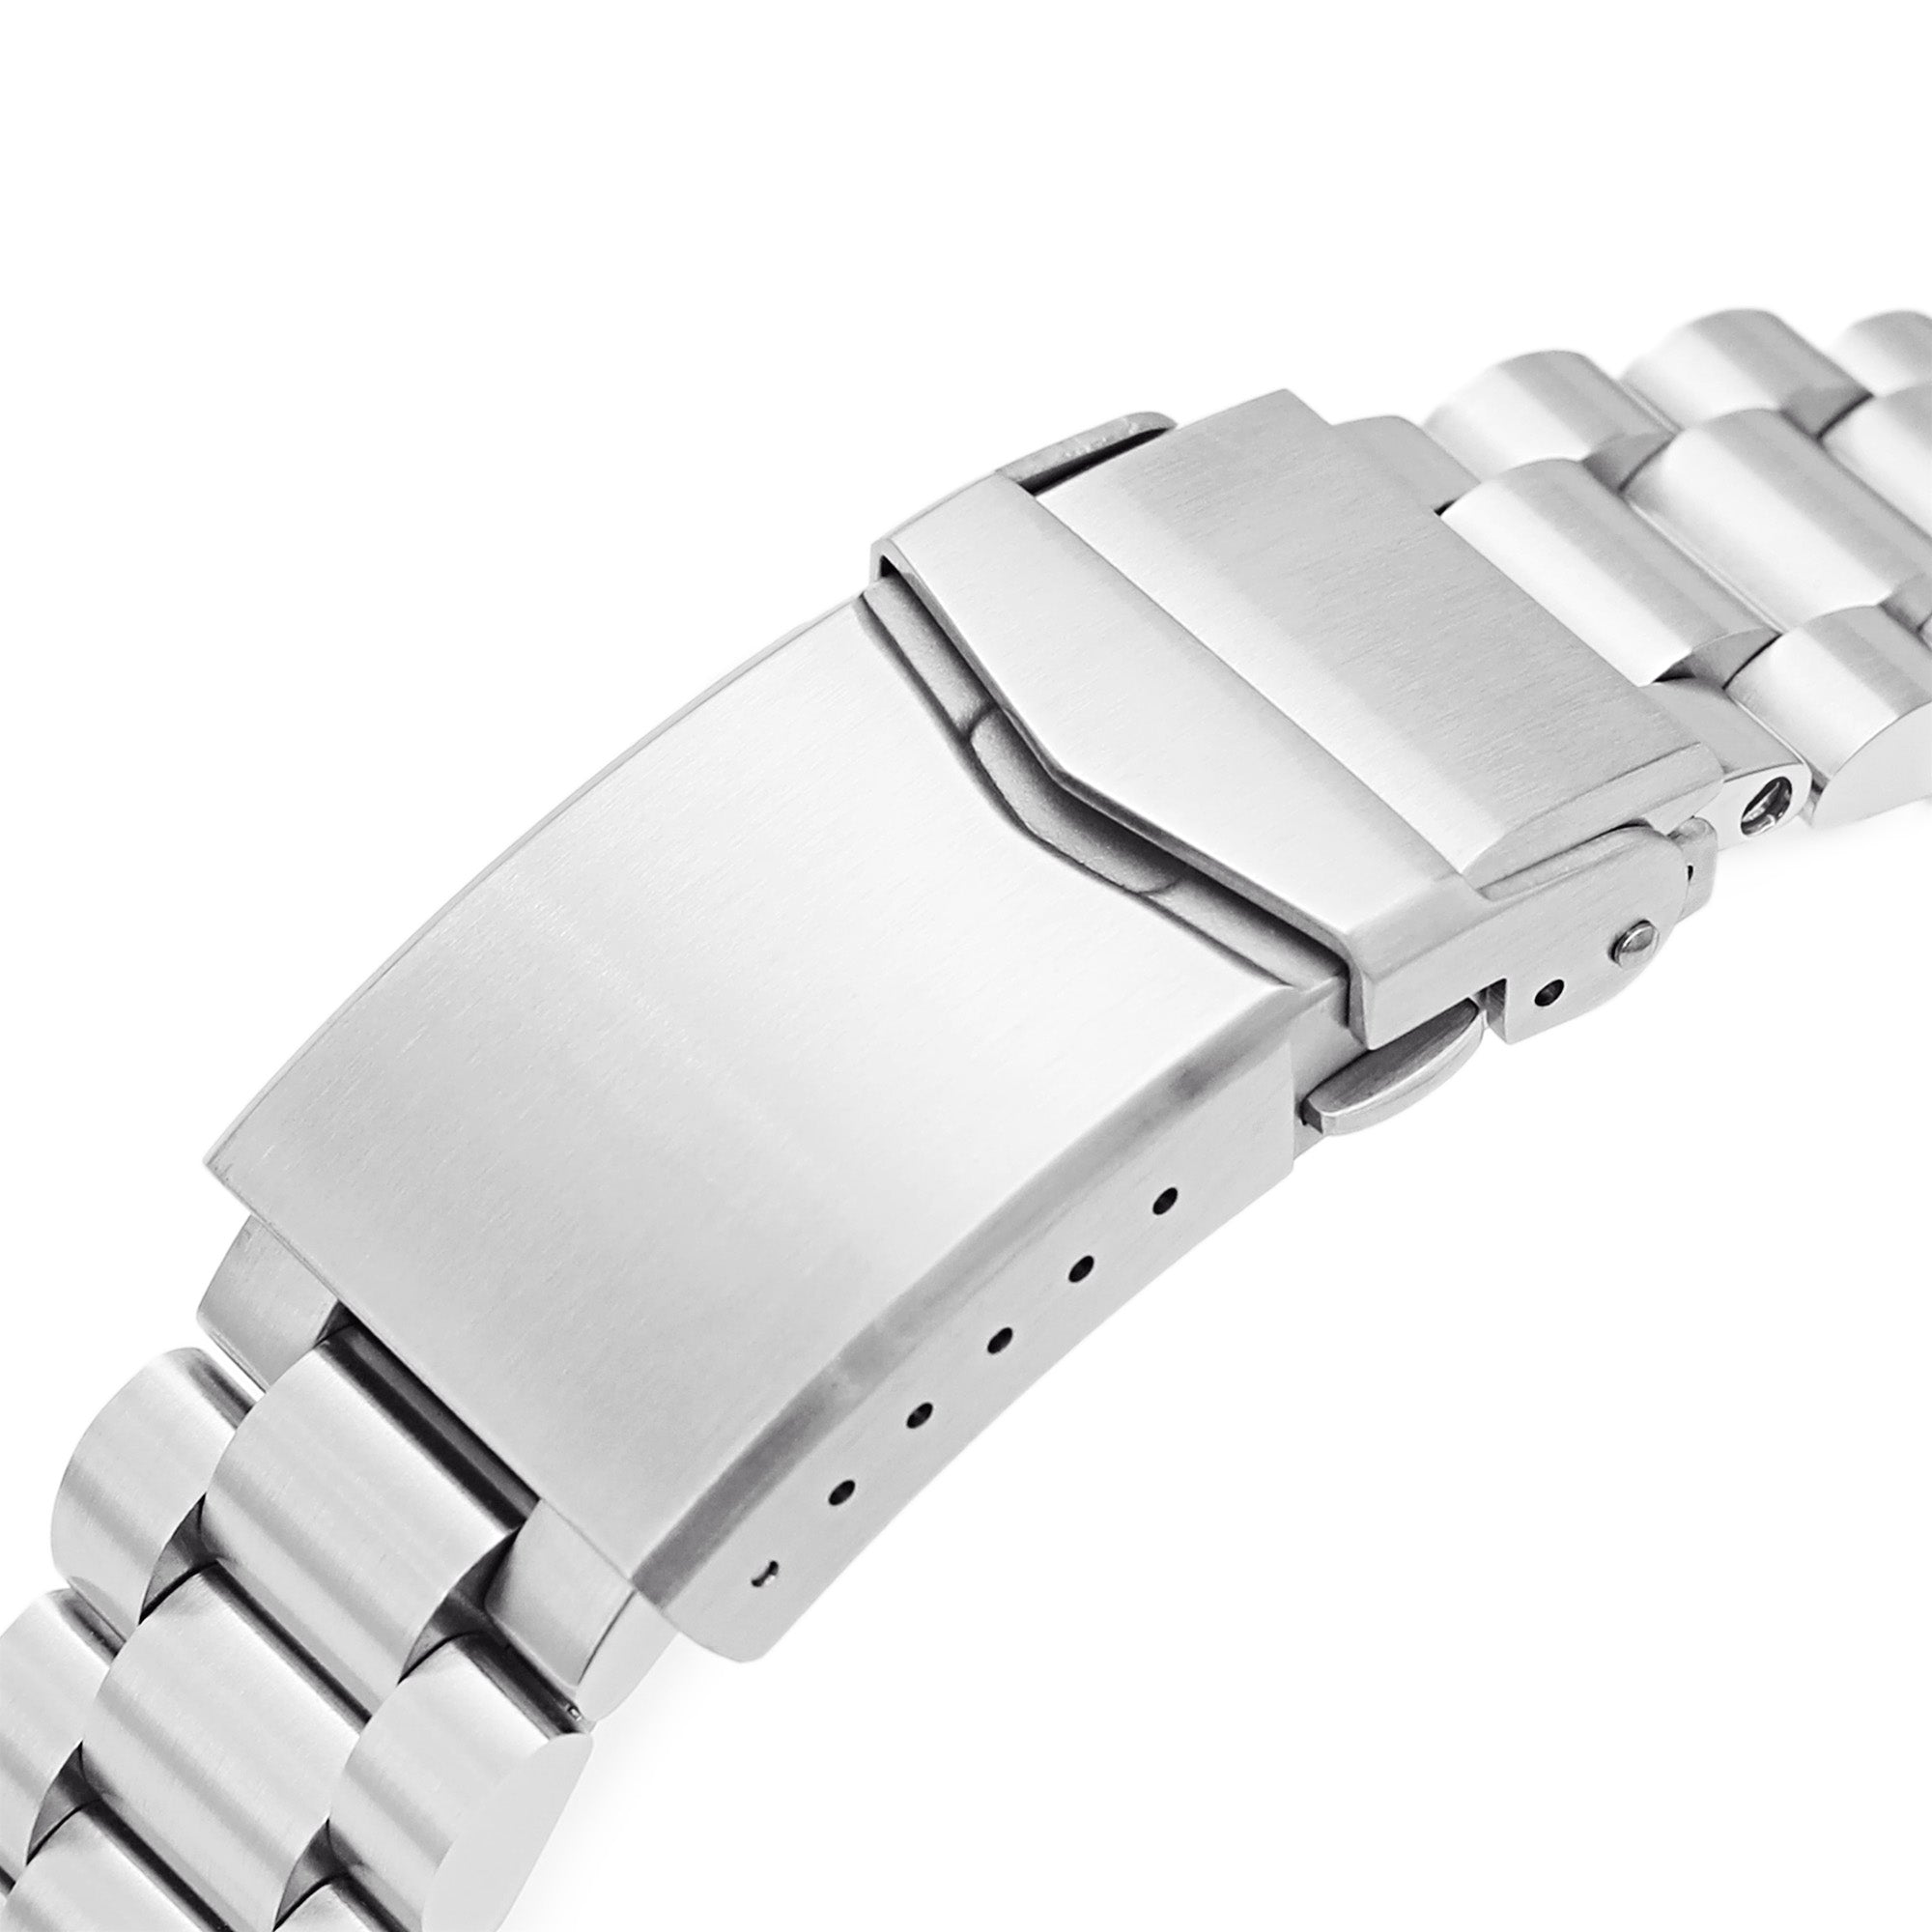 22mm Endmill Watch Band compatible with Seiko New Turtles SRP777 & PADI SRPA21, 316L Stainless Steel V-Clasp Brushed